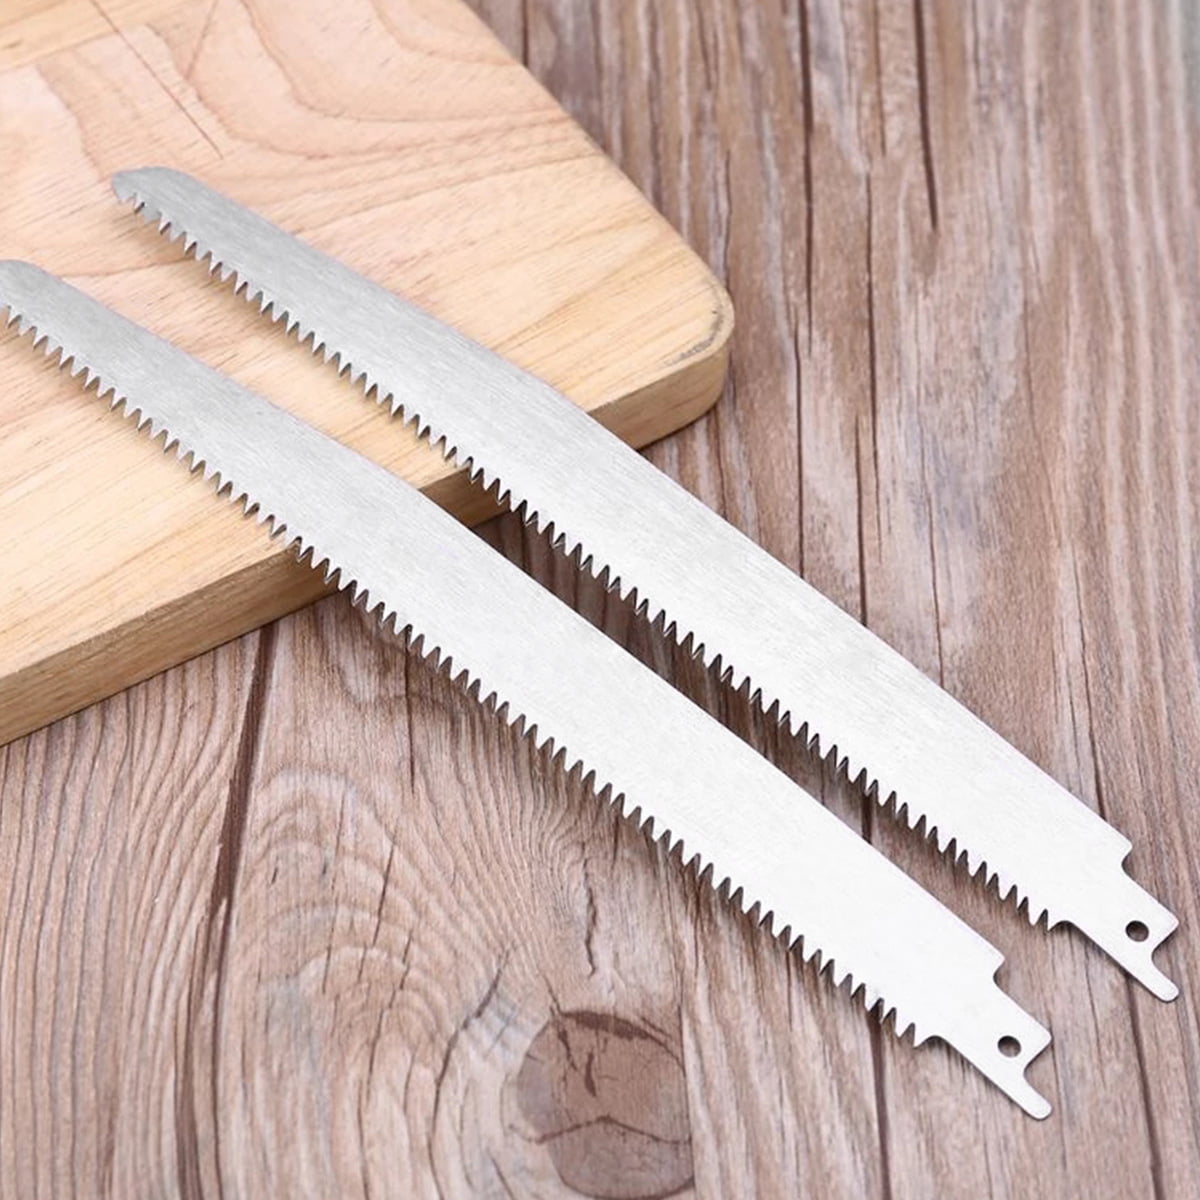 300mm Reciprocating Stainless Steel Power Saw Blade With 7TPI Fine Tooth  Effective For Cutting Frozen Meat Beef Turkey Bone Tool - AliExpress